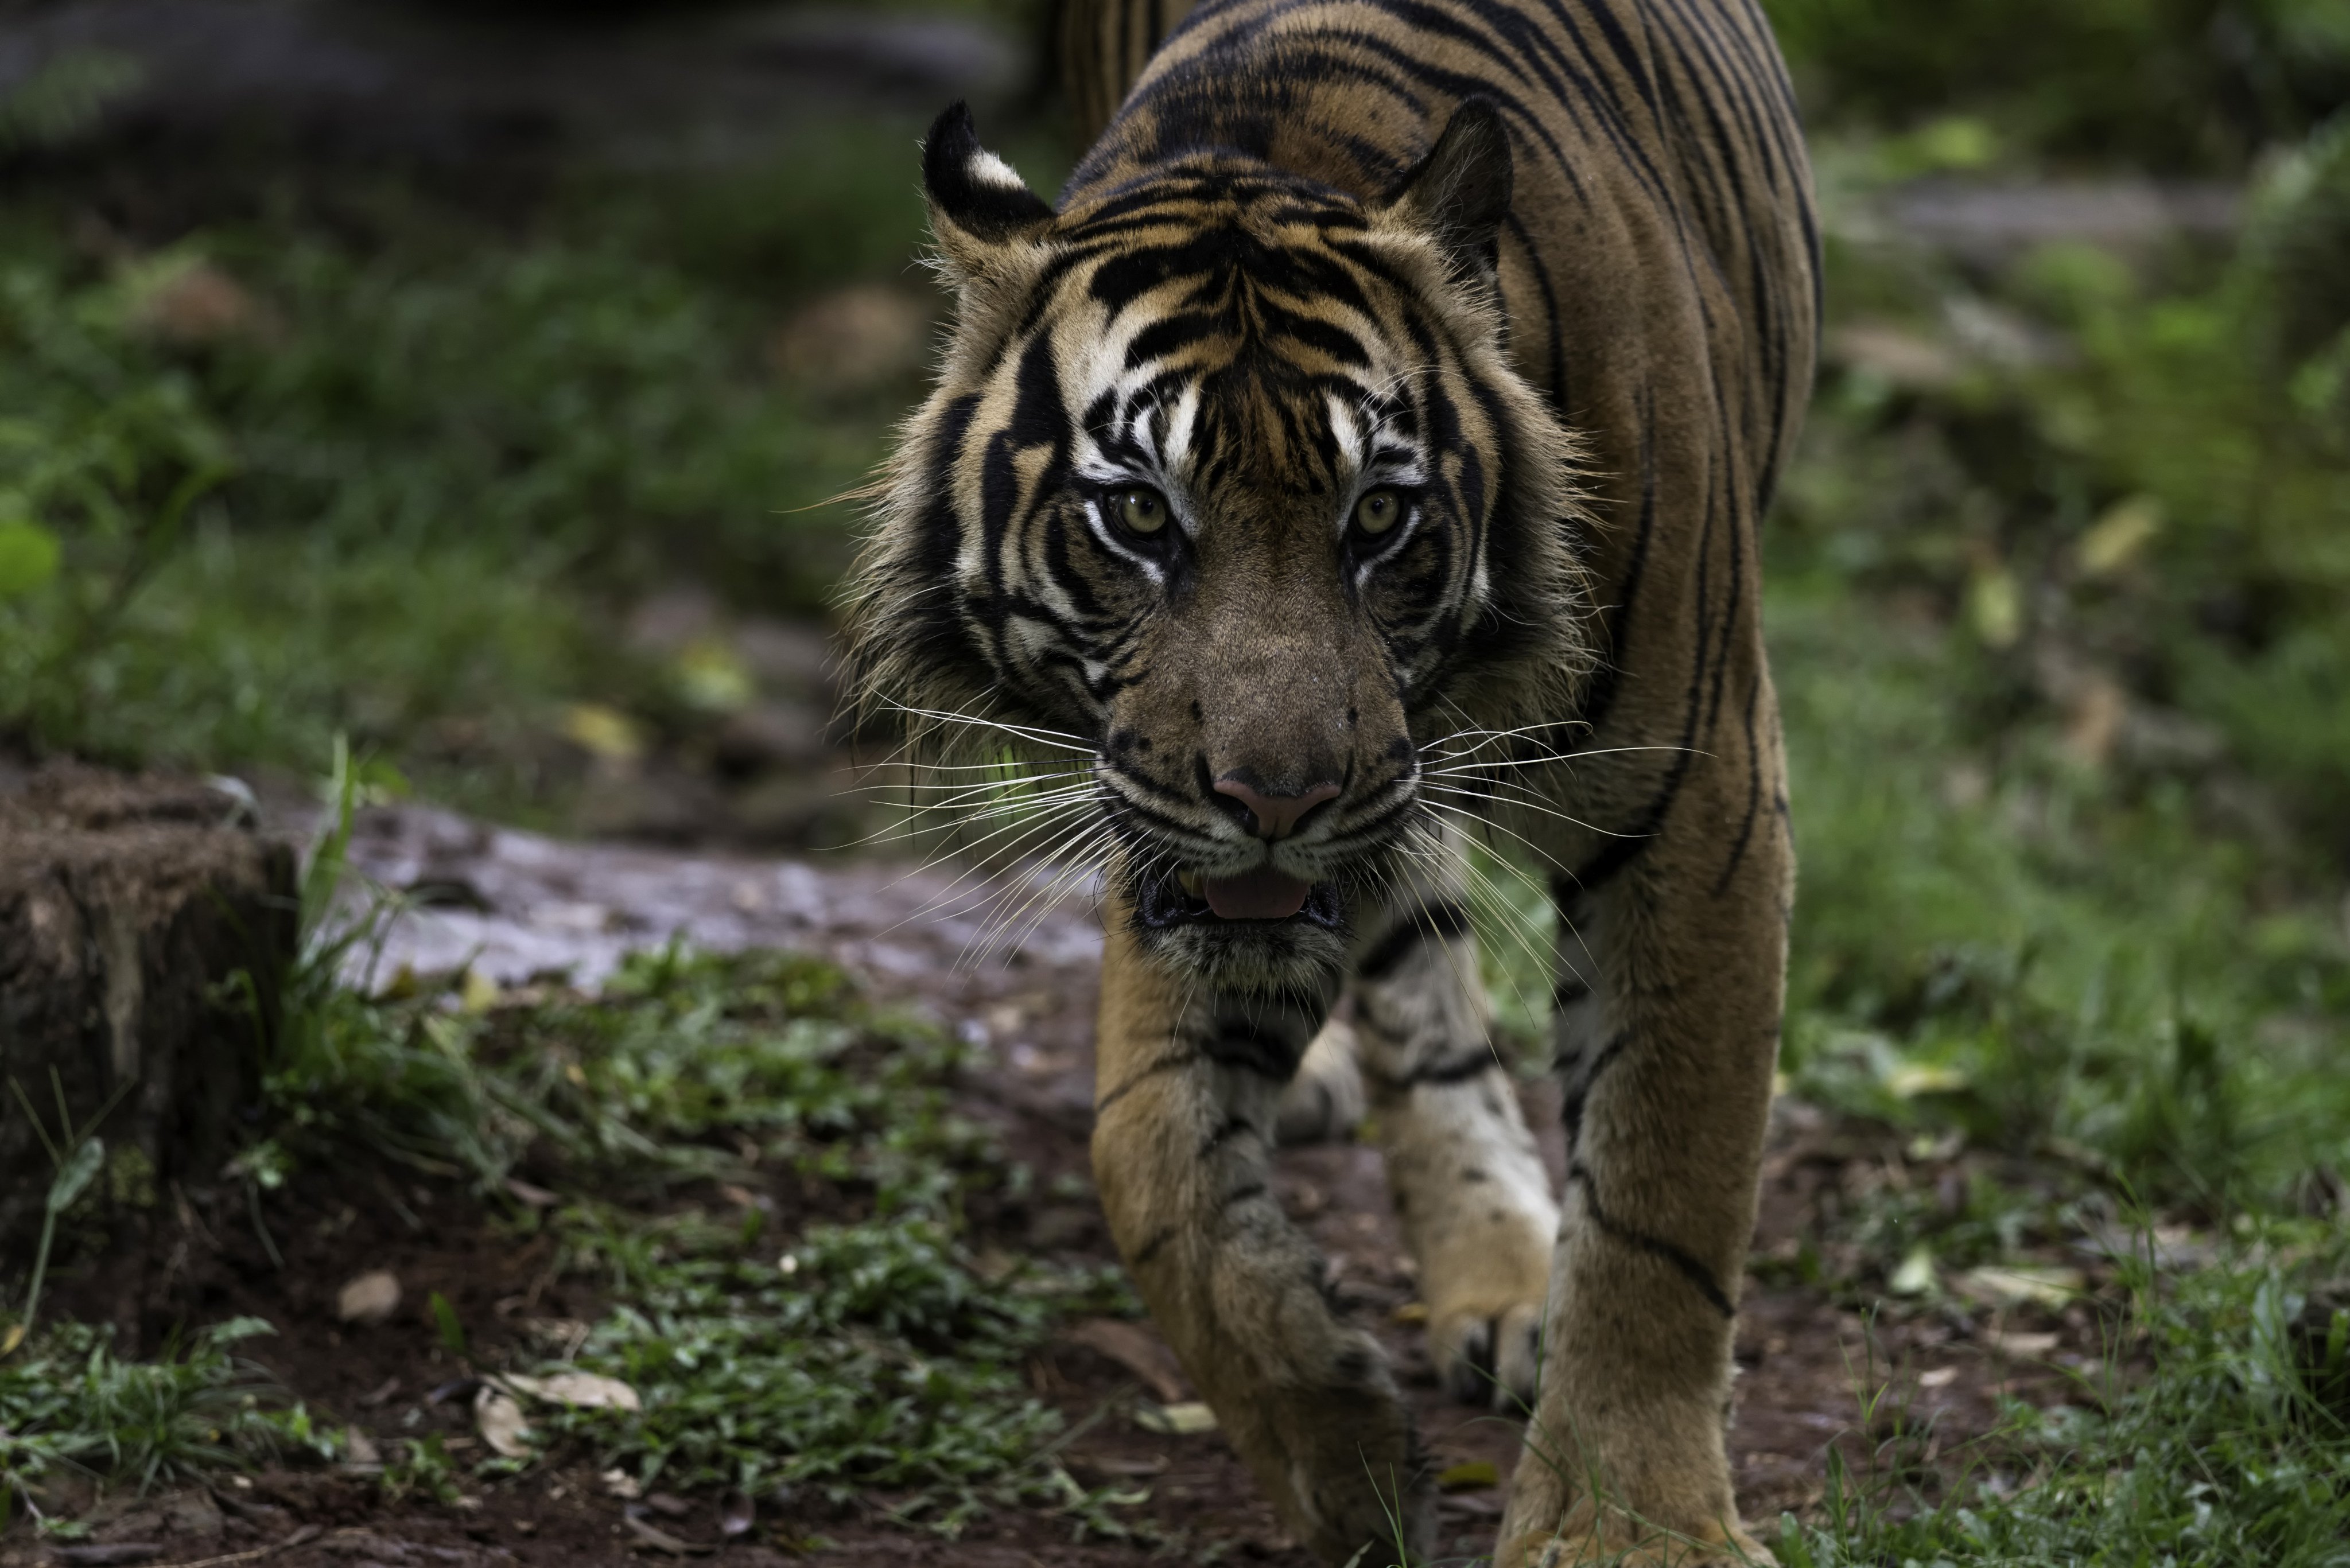 A Sumatran tiger. Illegally rearing protected animals carries a maximum sentence of five years’ imprisonment under Indonesian law. Photo: Shutterstock